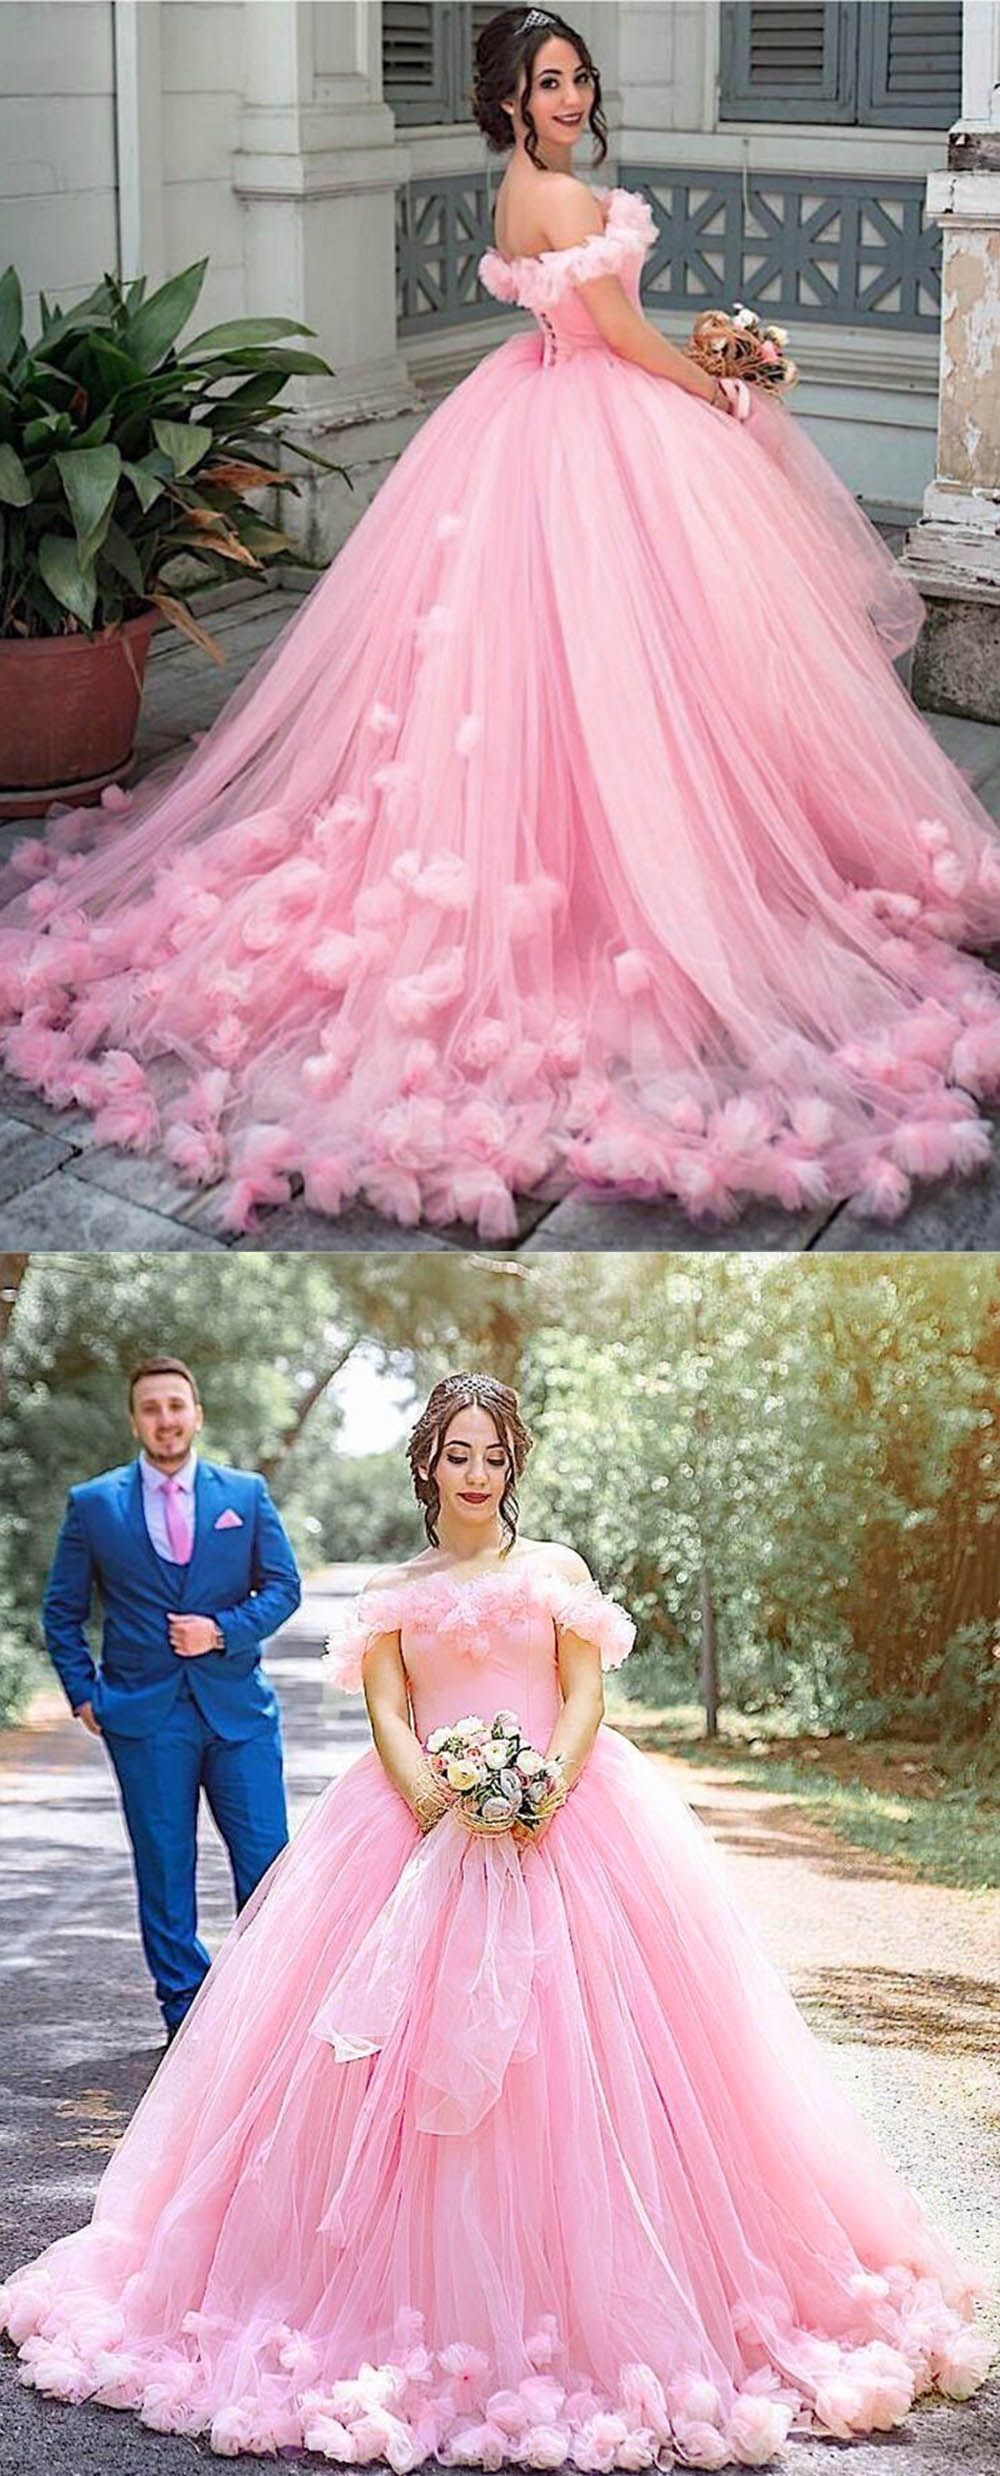 Gracious light pastel pink ball gown wedding/prom dress with puffy tiered  skirt - various styles